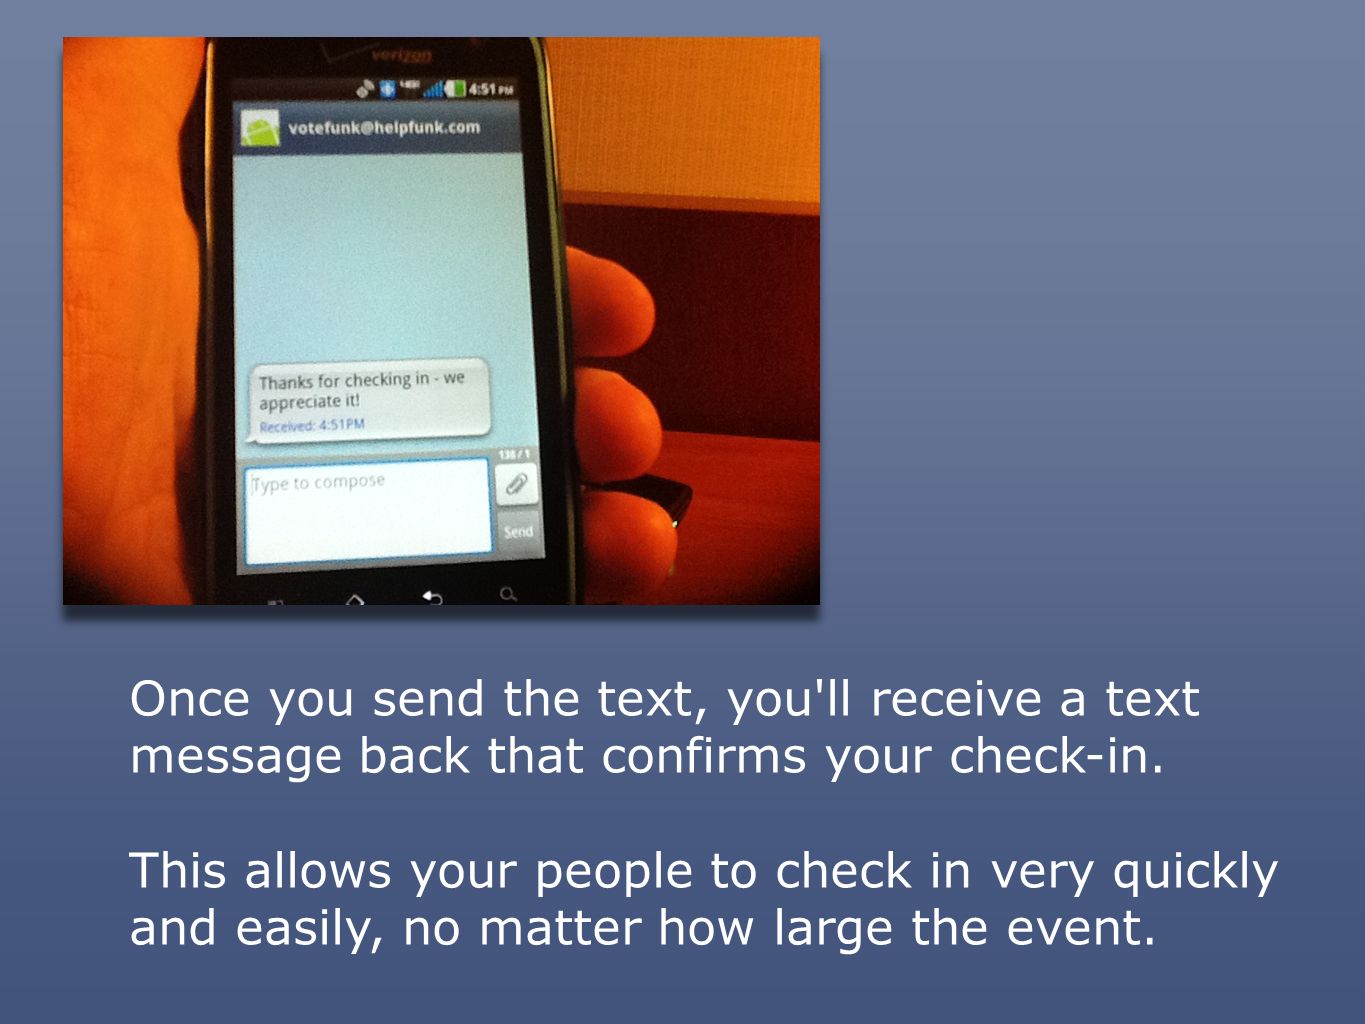 Once you send the text, you ll receive a text message back that confirms your check-in.